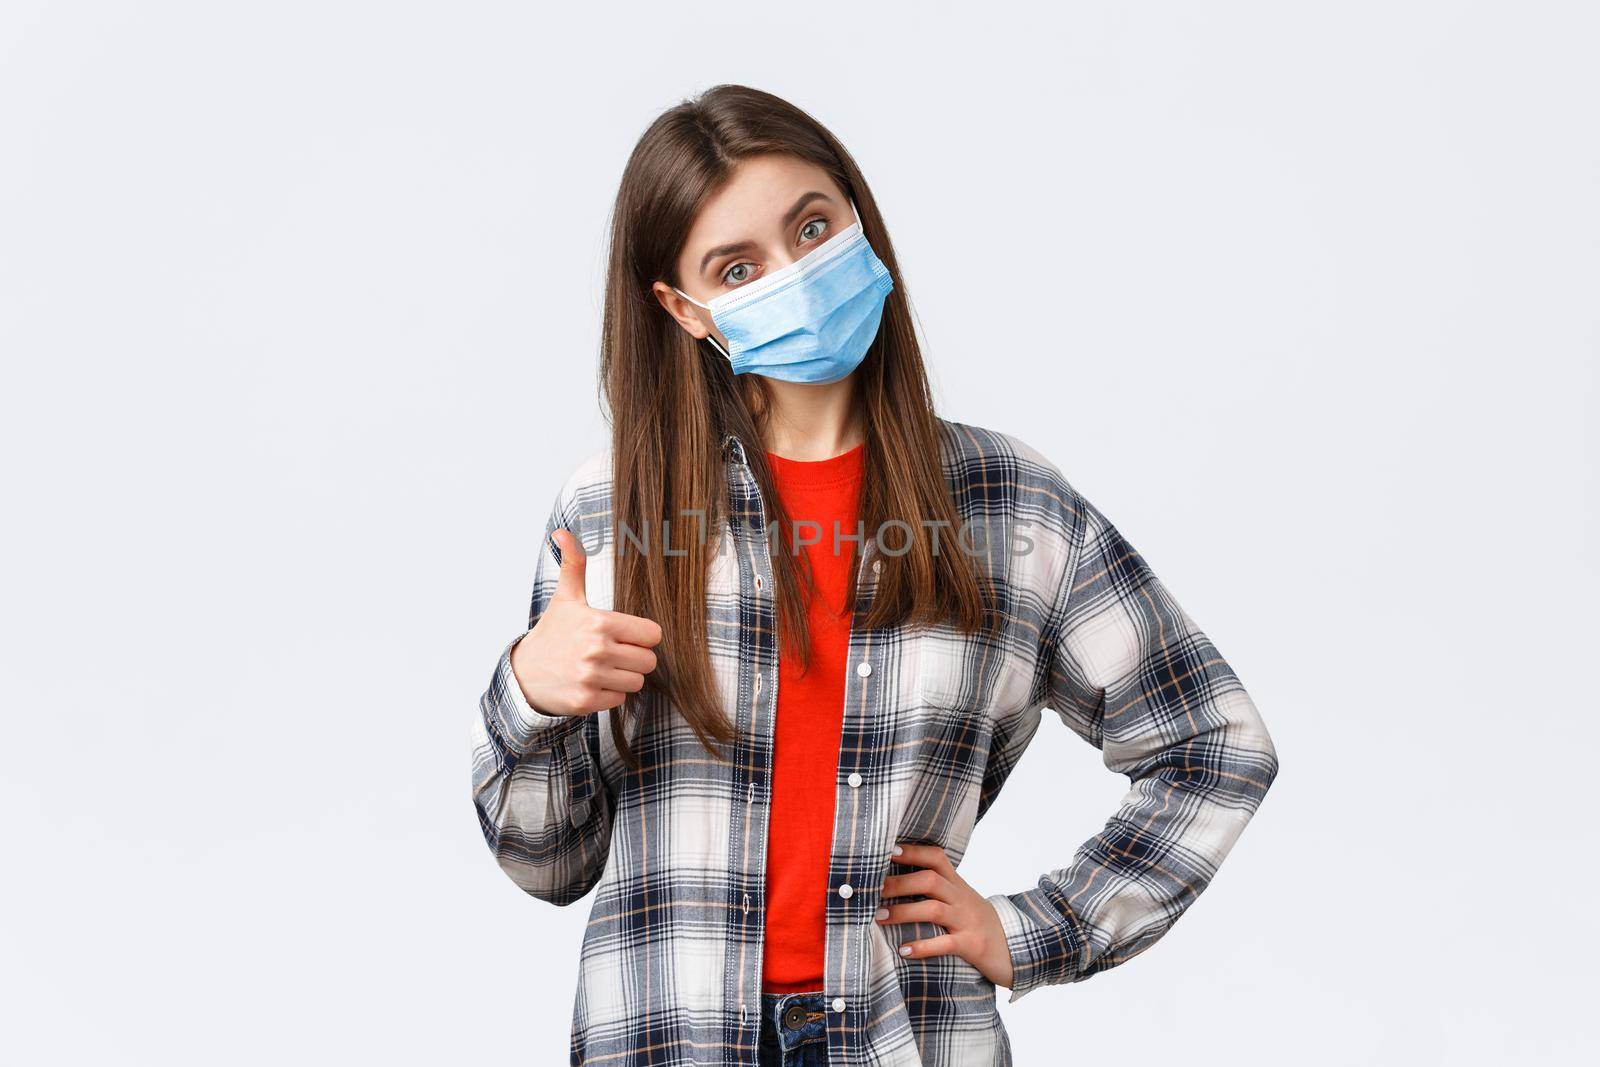 Coronavirus outbreak, leisure on quarantine, social distancing and emotions concept. Confident good-looking woman in medical mask give advice, recommend promo, show thumb-up in approval.